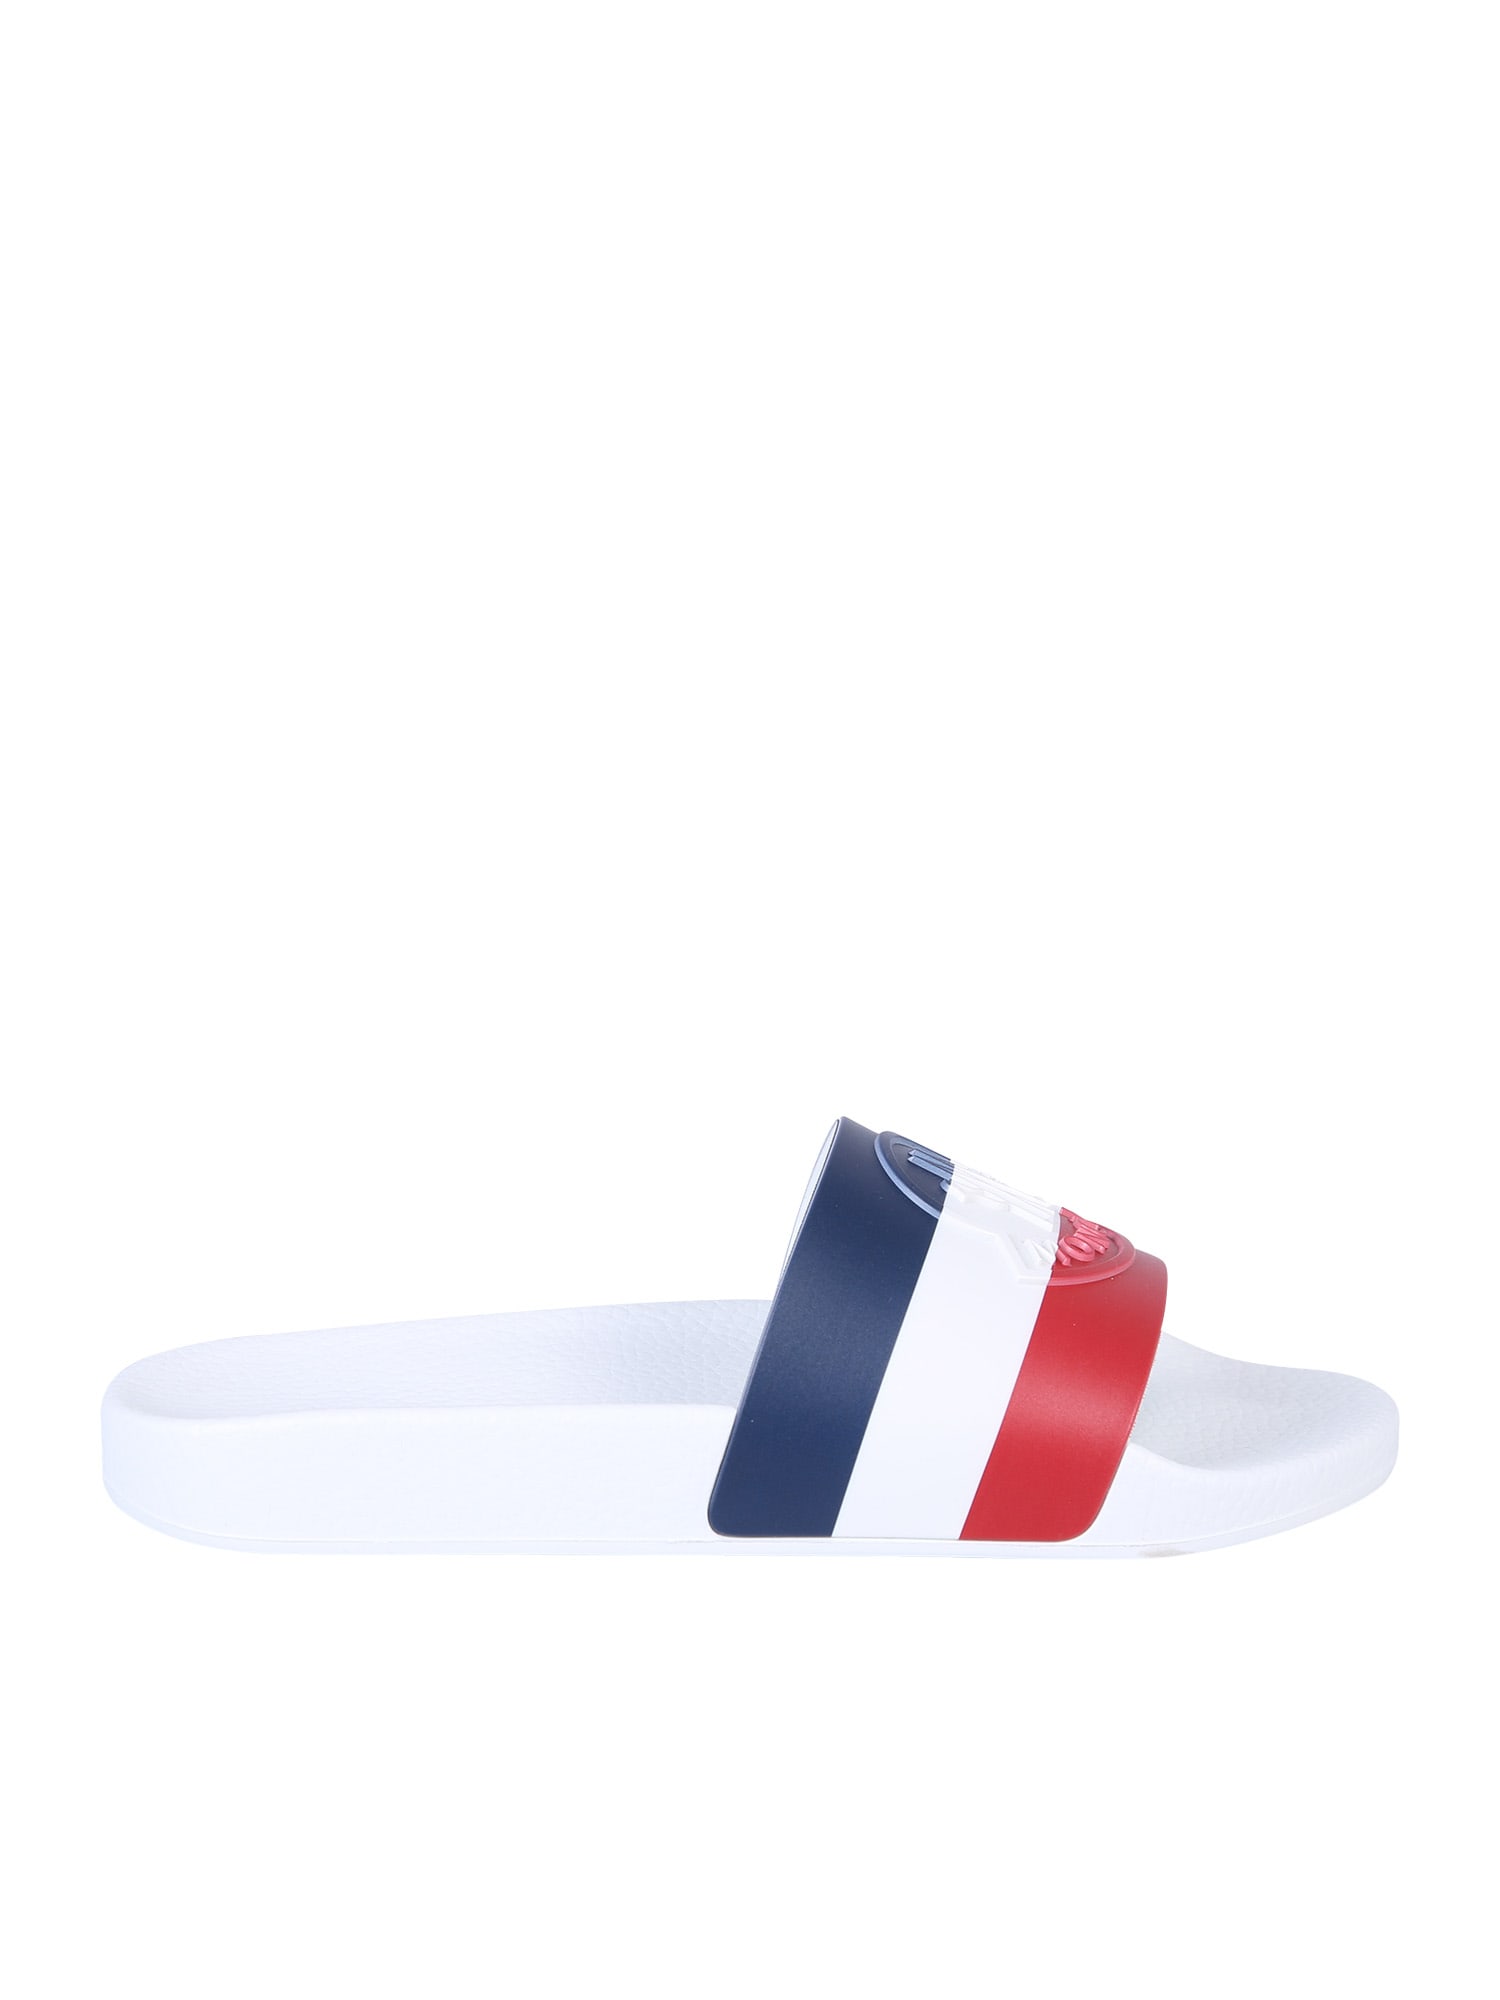 Buy Moncler Branded Slide Sandals online, shop Moncler shoes with free shipping